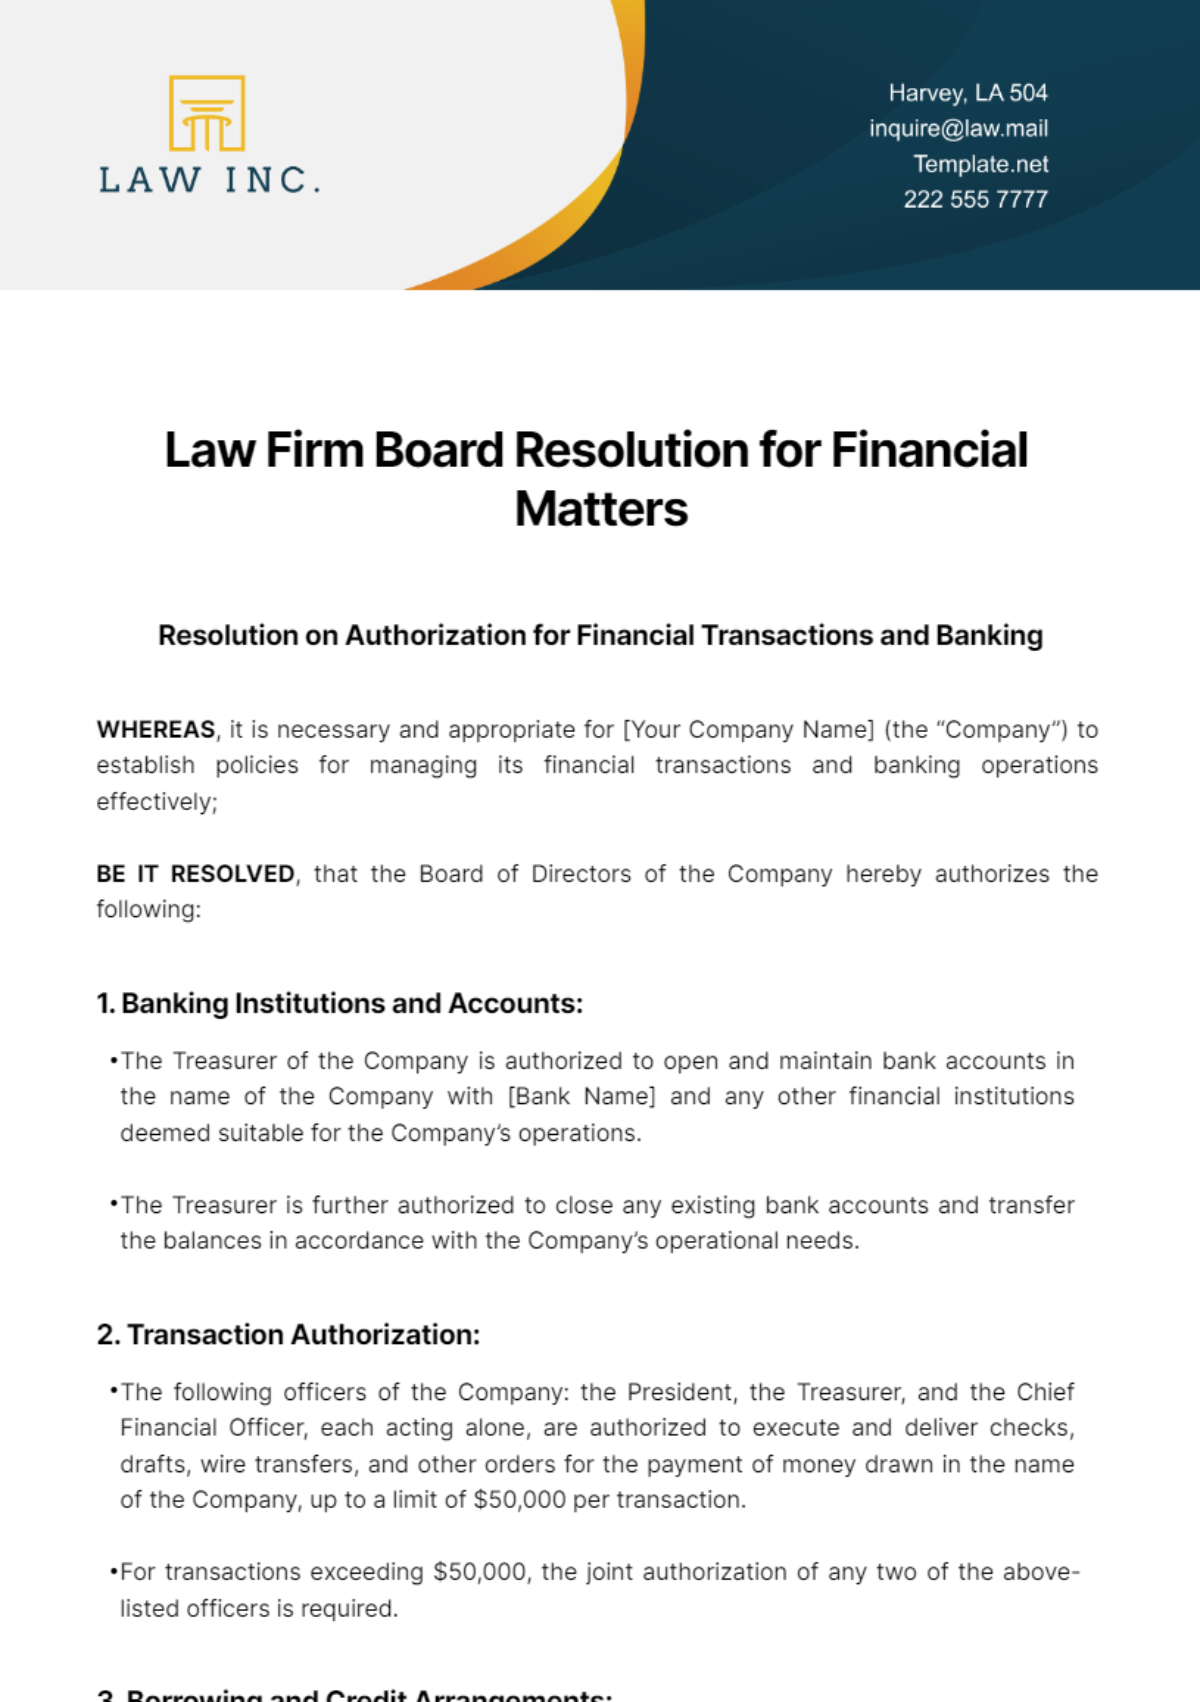 Law Firm Board Resolution for Financial Matters Template